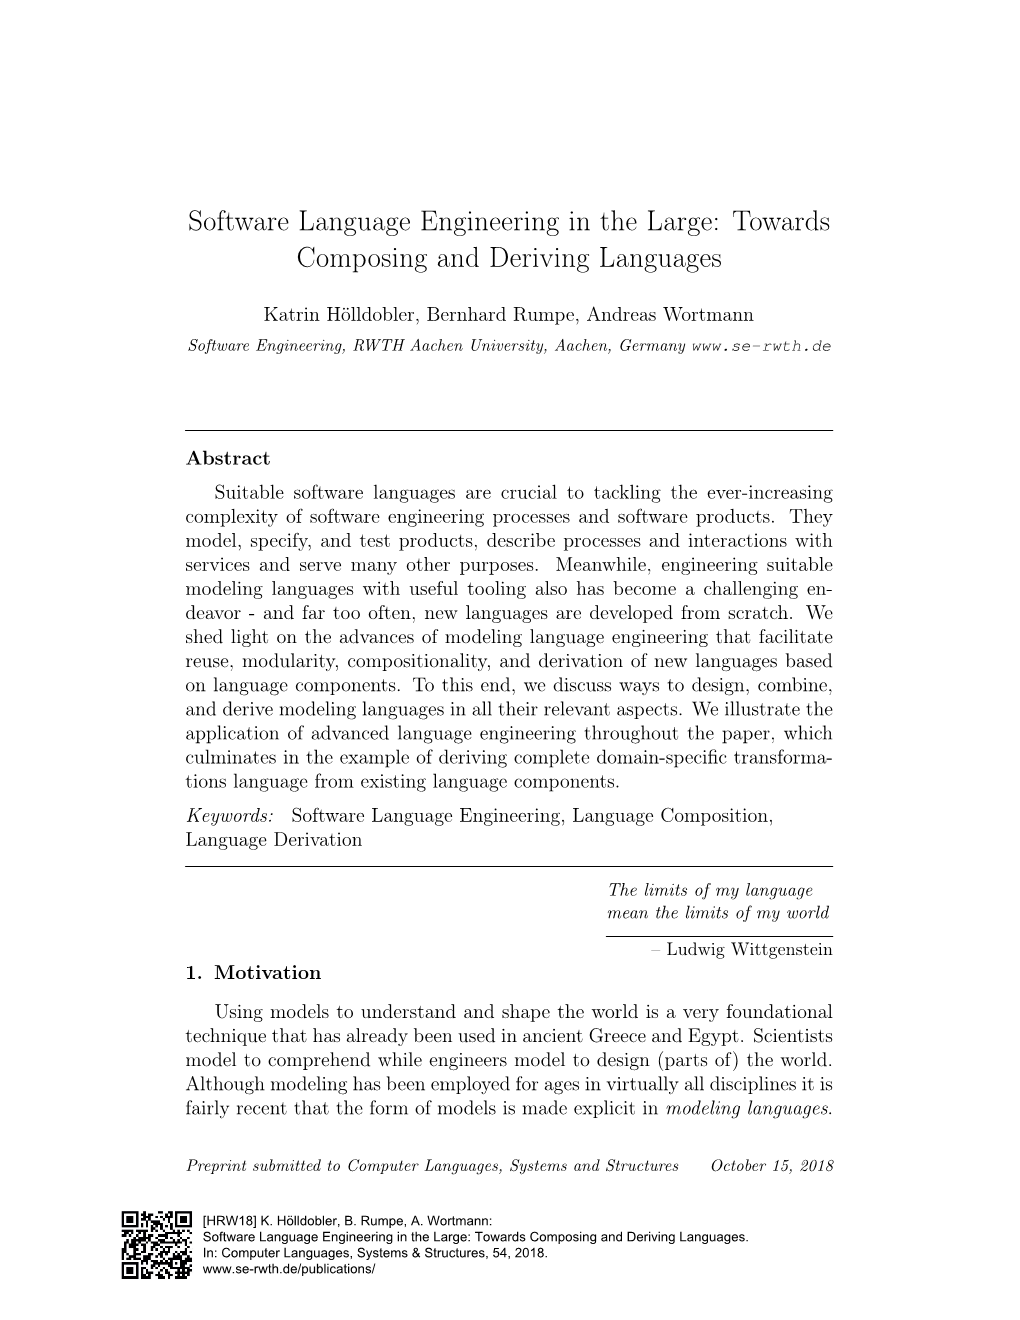 Software Language Engineering in the Large: Towards Composing and Deriving Languages